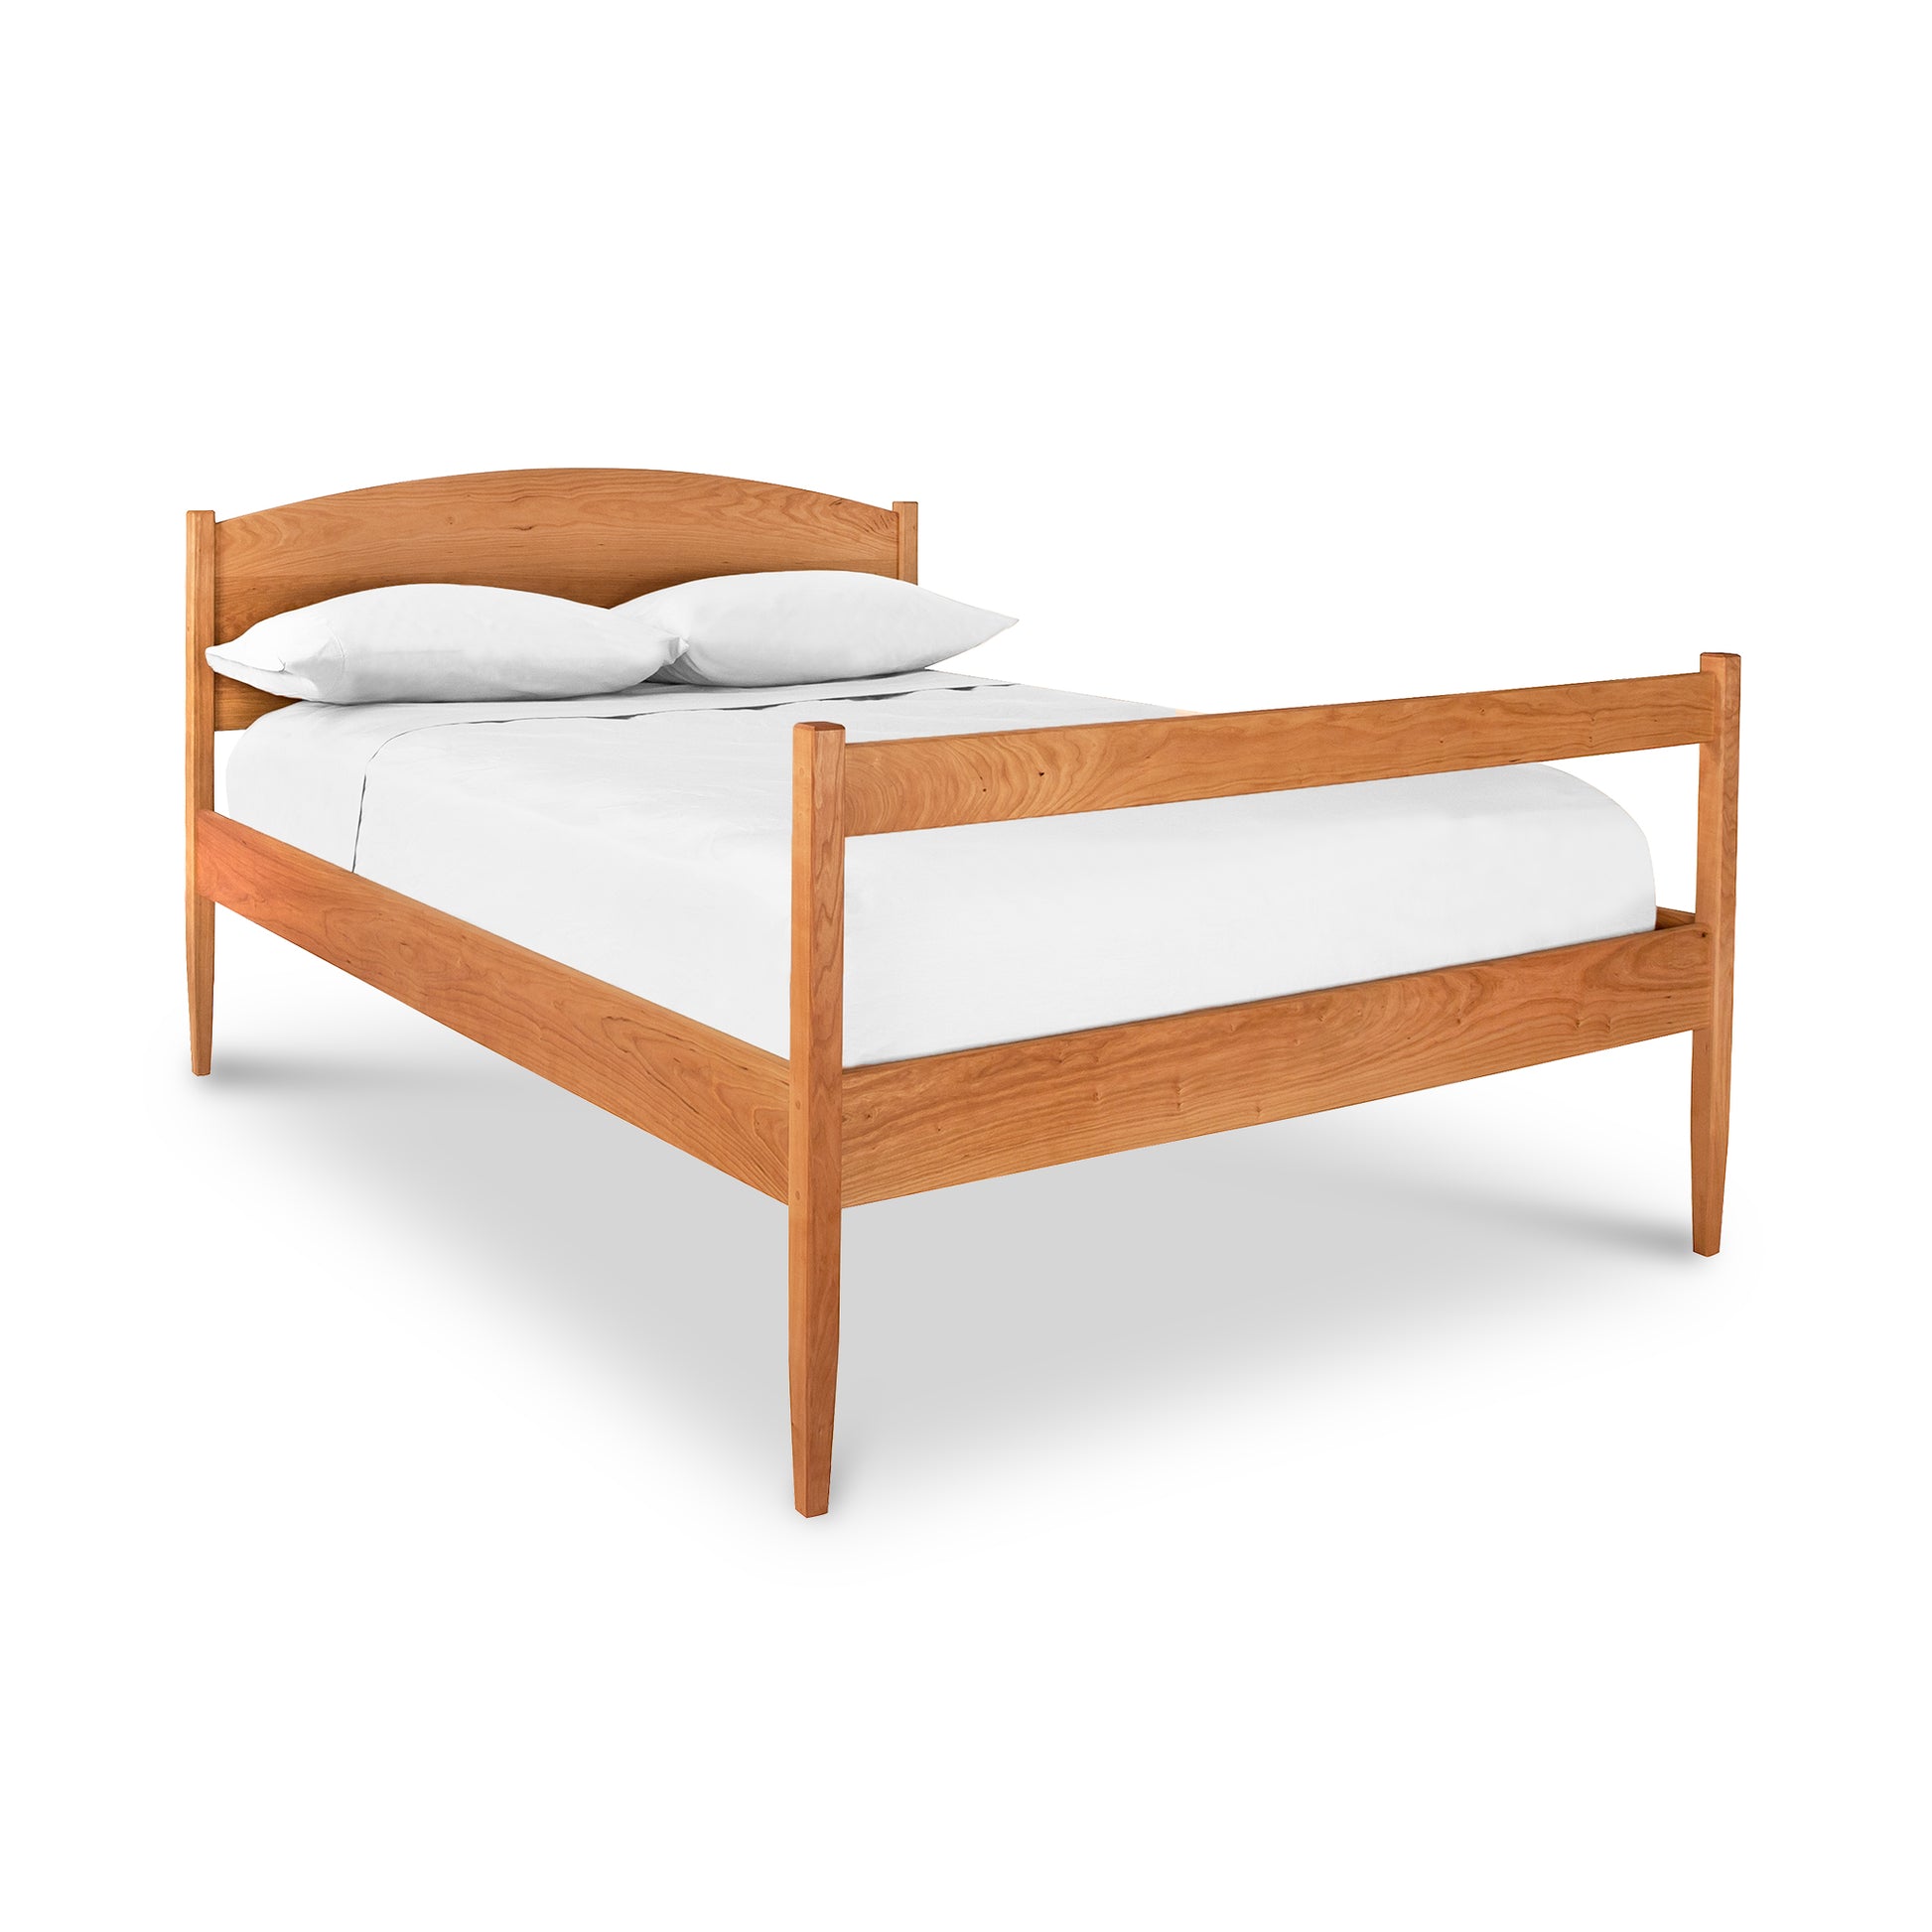 A Vermont Shaker Platform Bed, handmade by Vermont furniture makers from Maple Corner Woodworks, featuring solid hardwood and white sheets.